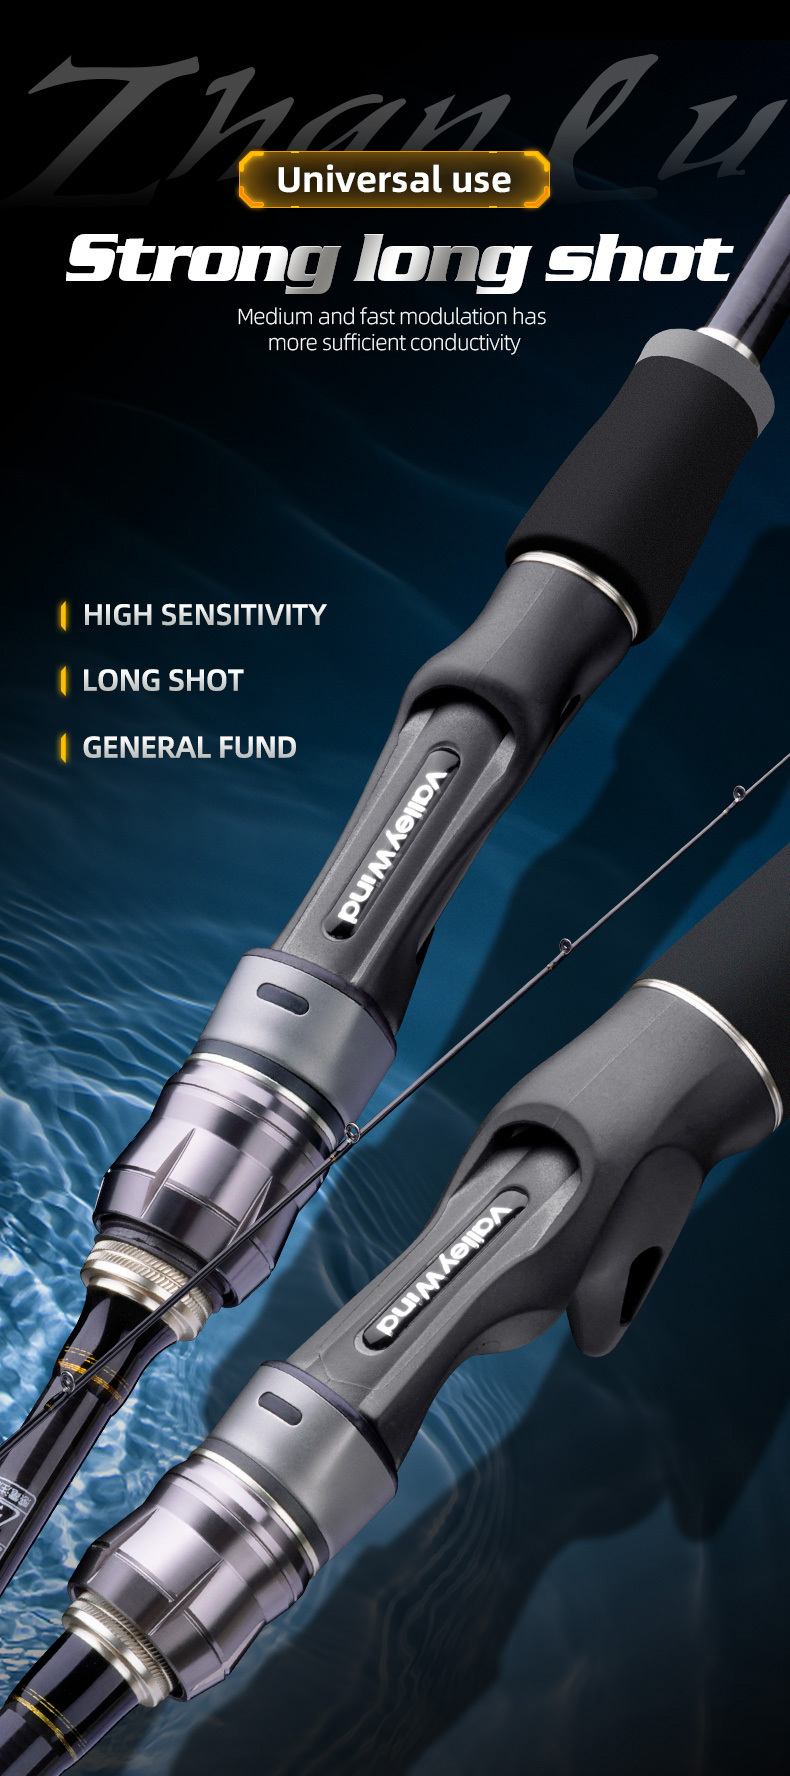 5 section Fishing Rod 36+30t High Carbon X cross Lure - Temu